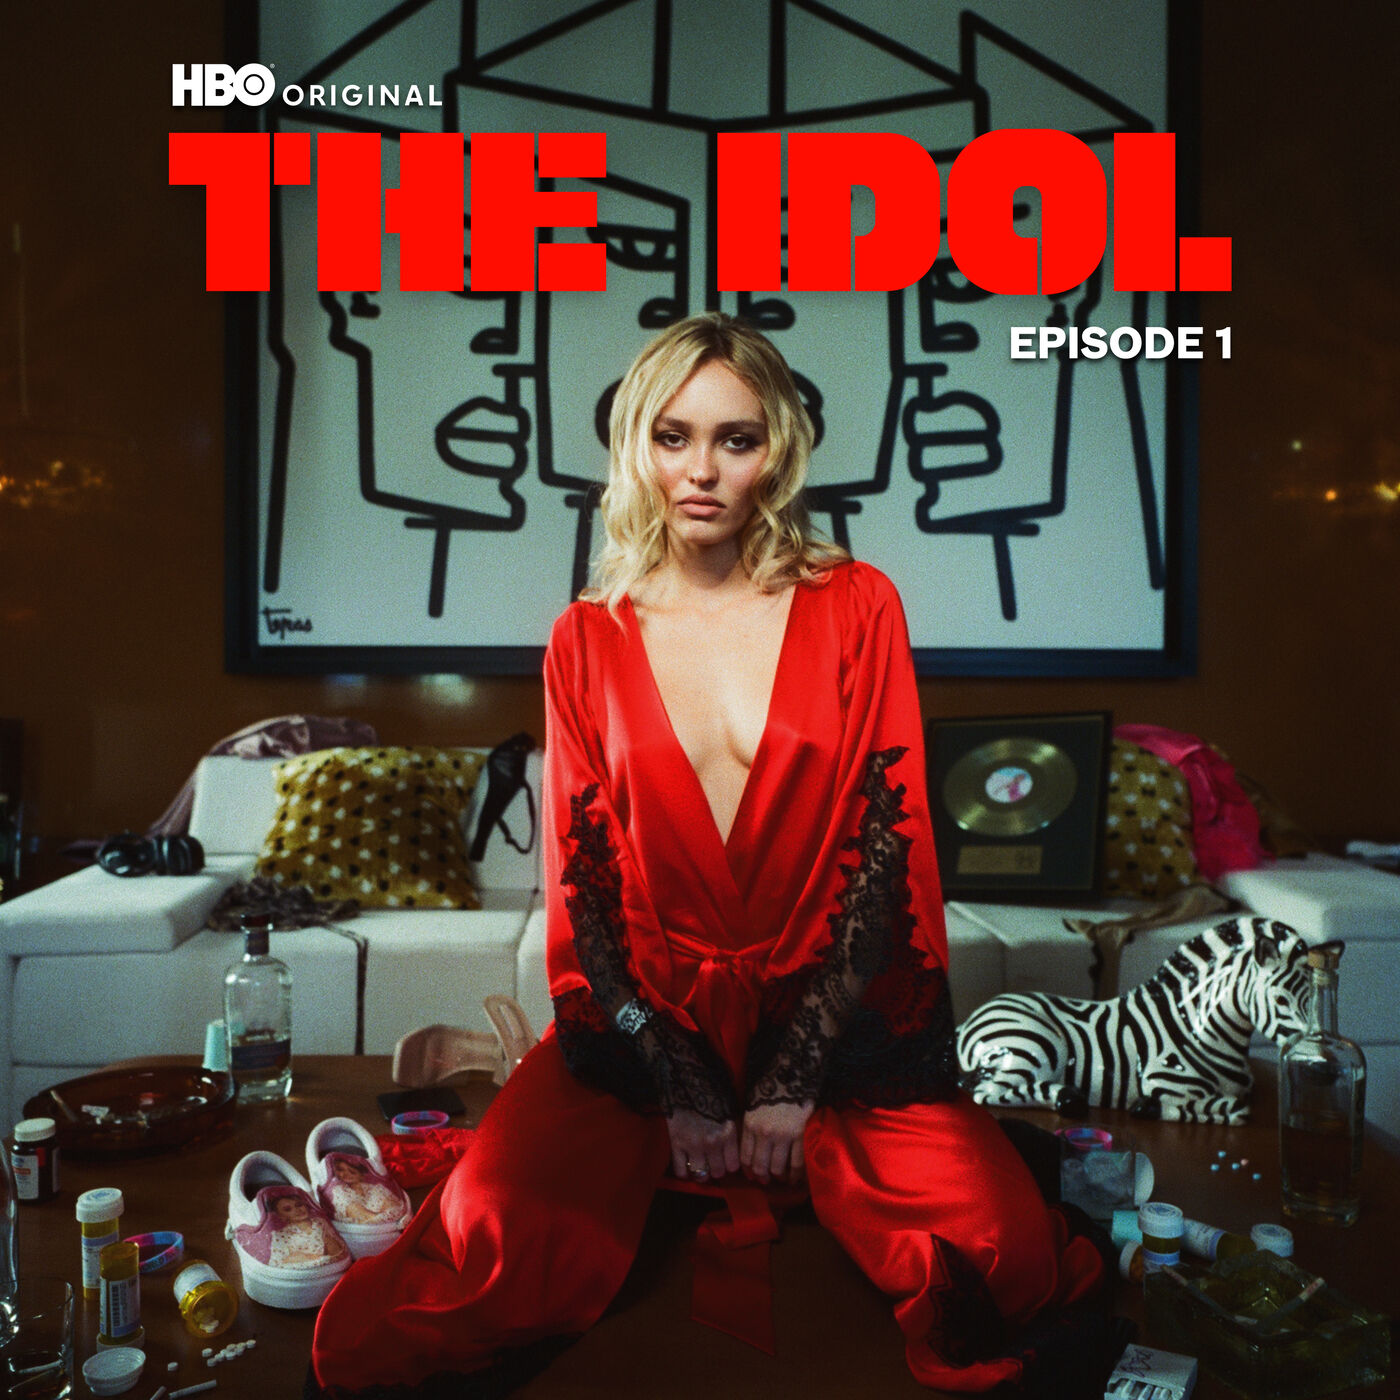 The Weeknd – The Idol Episode 1 (Music from the HBO Original Series)【88.2kHz／24bit】美国区-OppsUpro音乐帝国